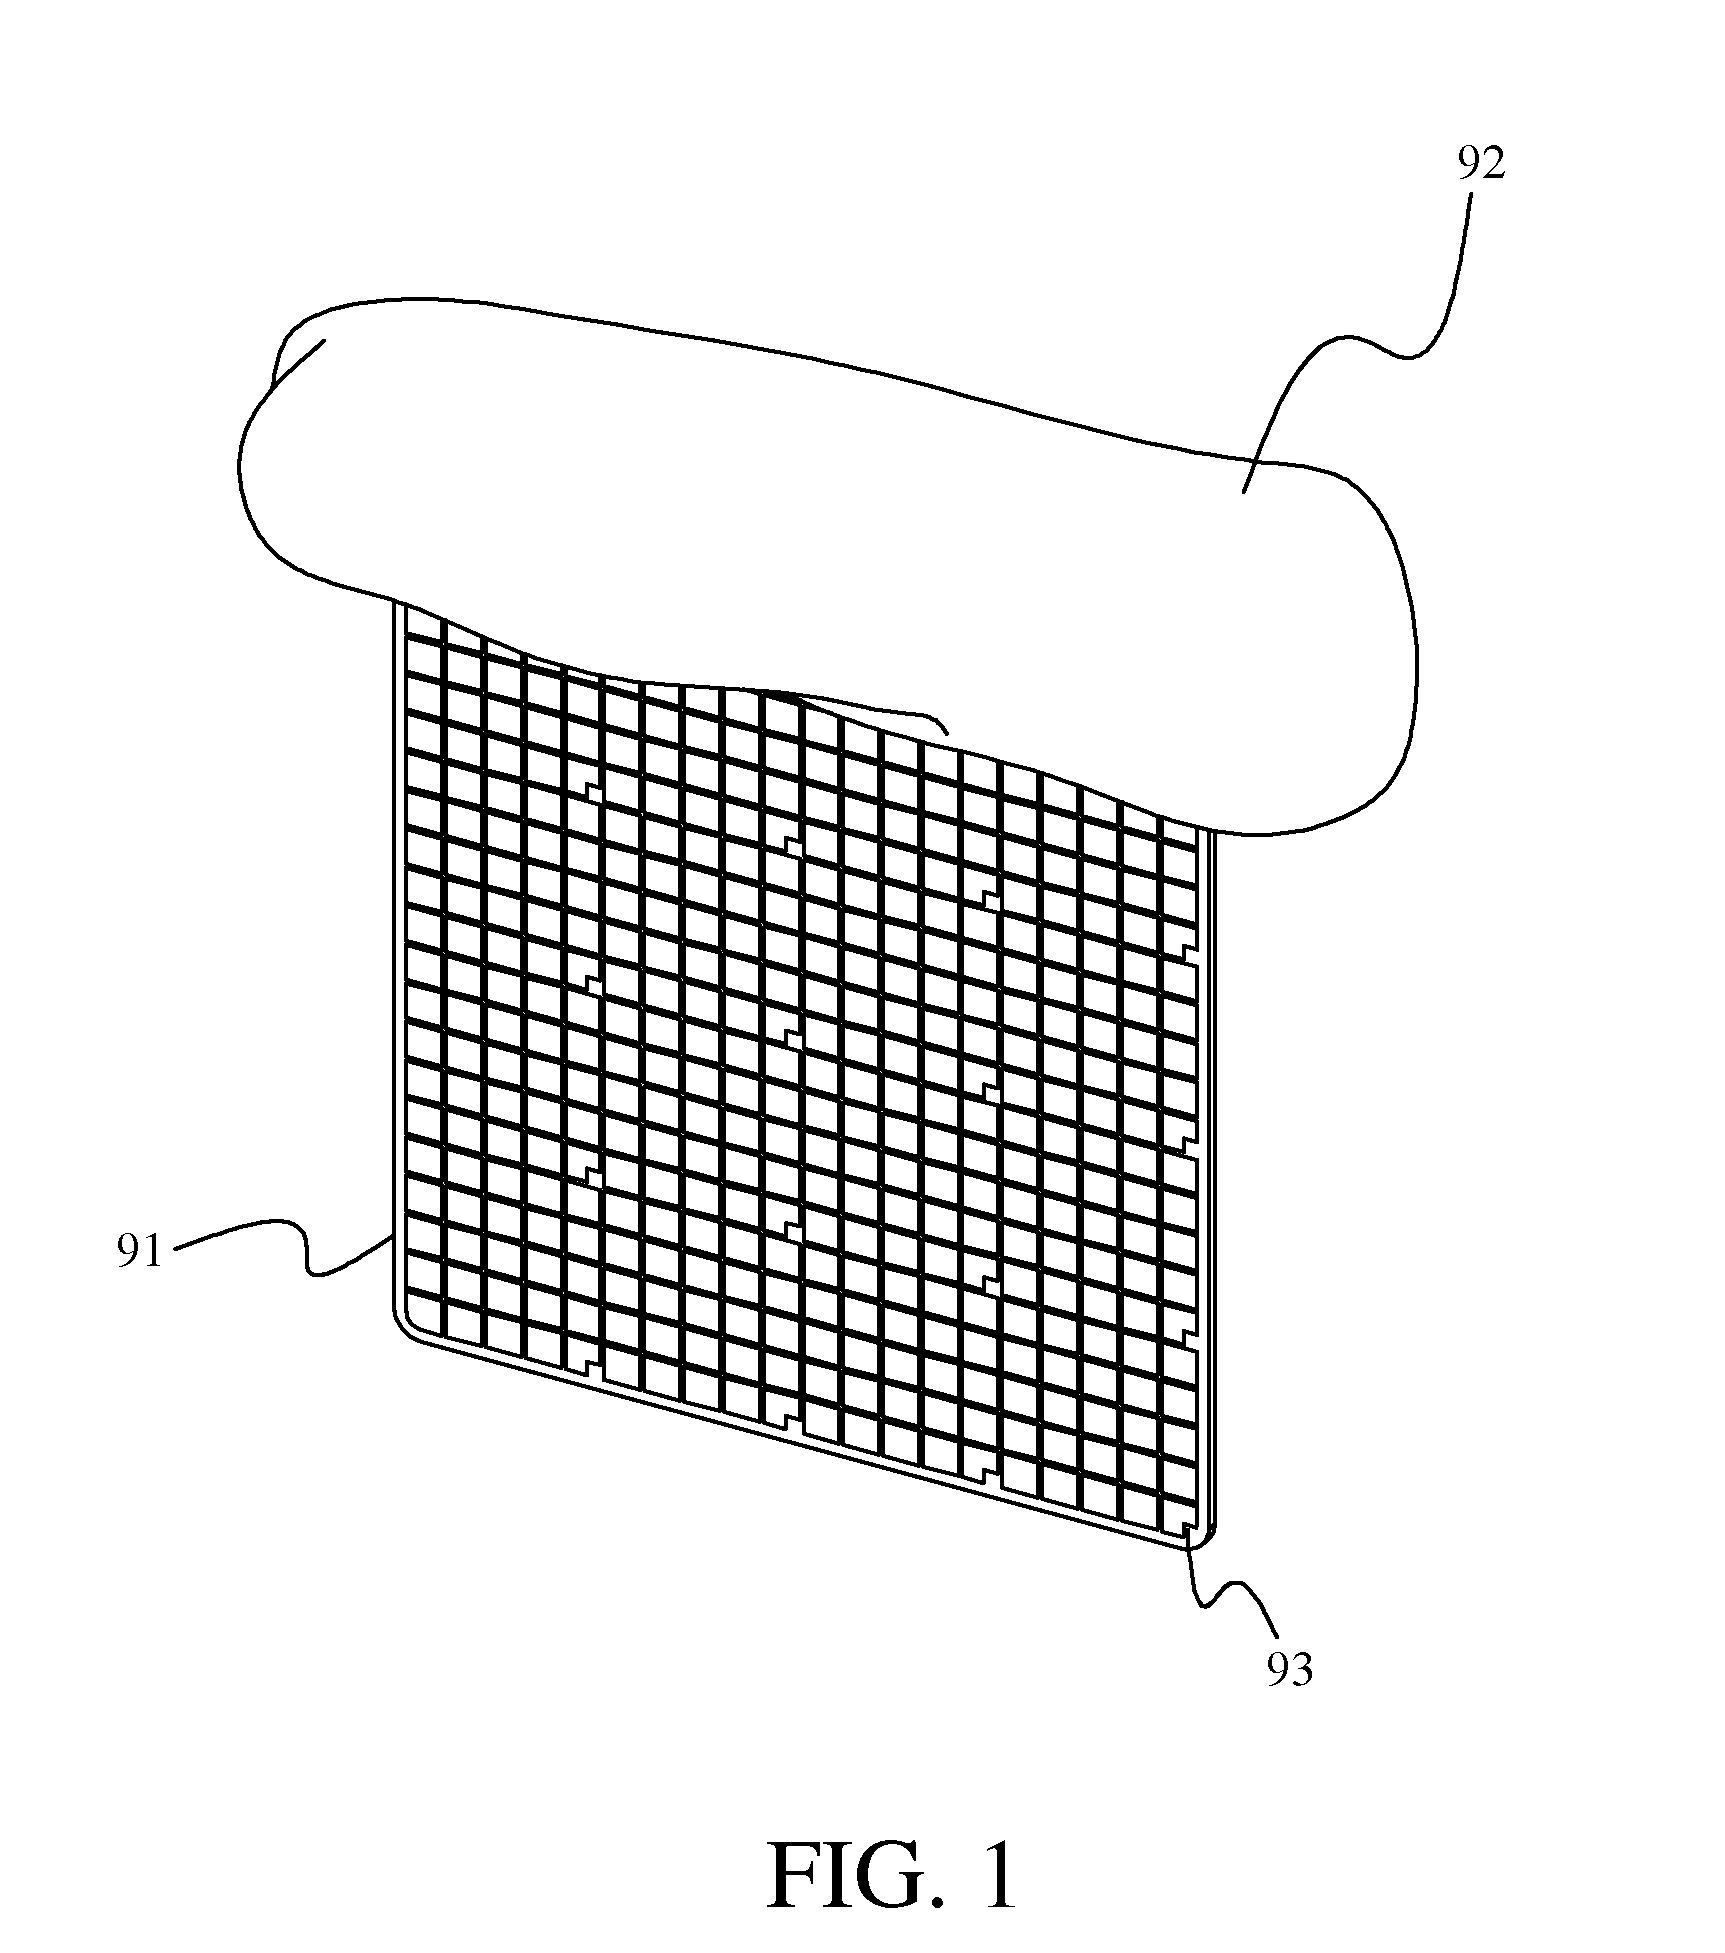 Multi-coordinate orthodontic implant positioning device